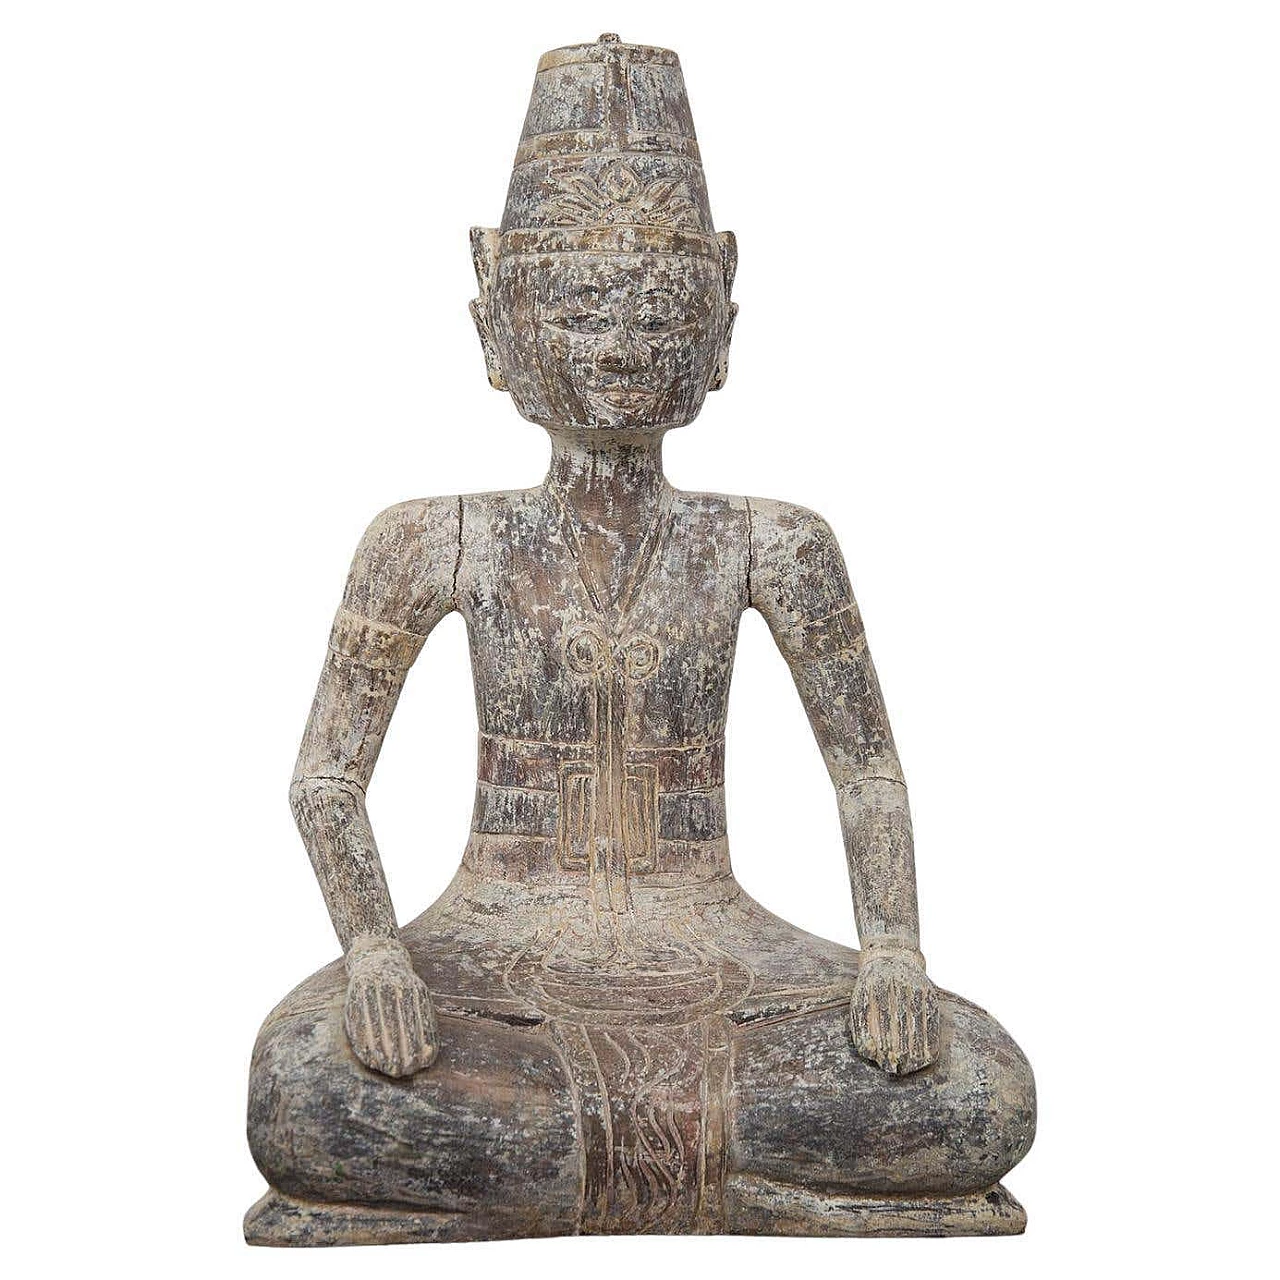 Balinese statue of a seated Hindu priest, early 20th century 1